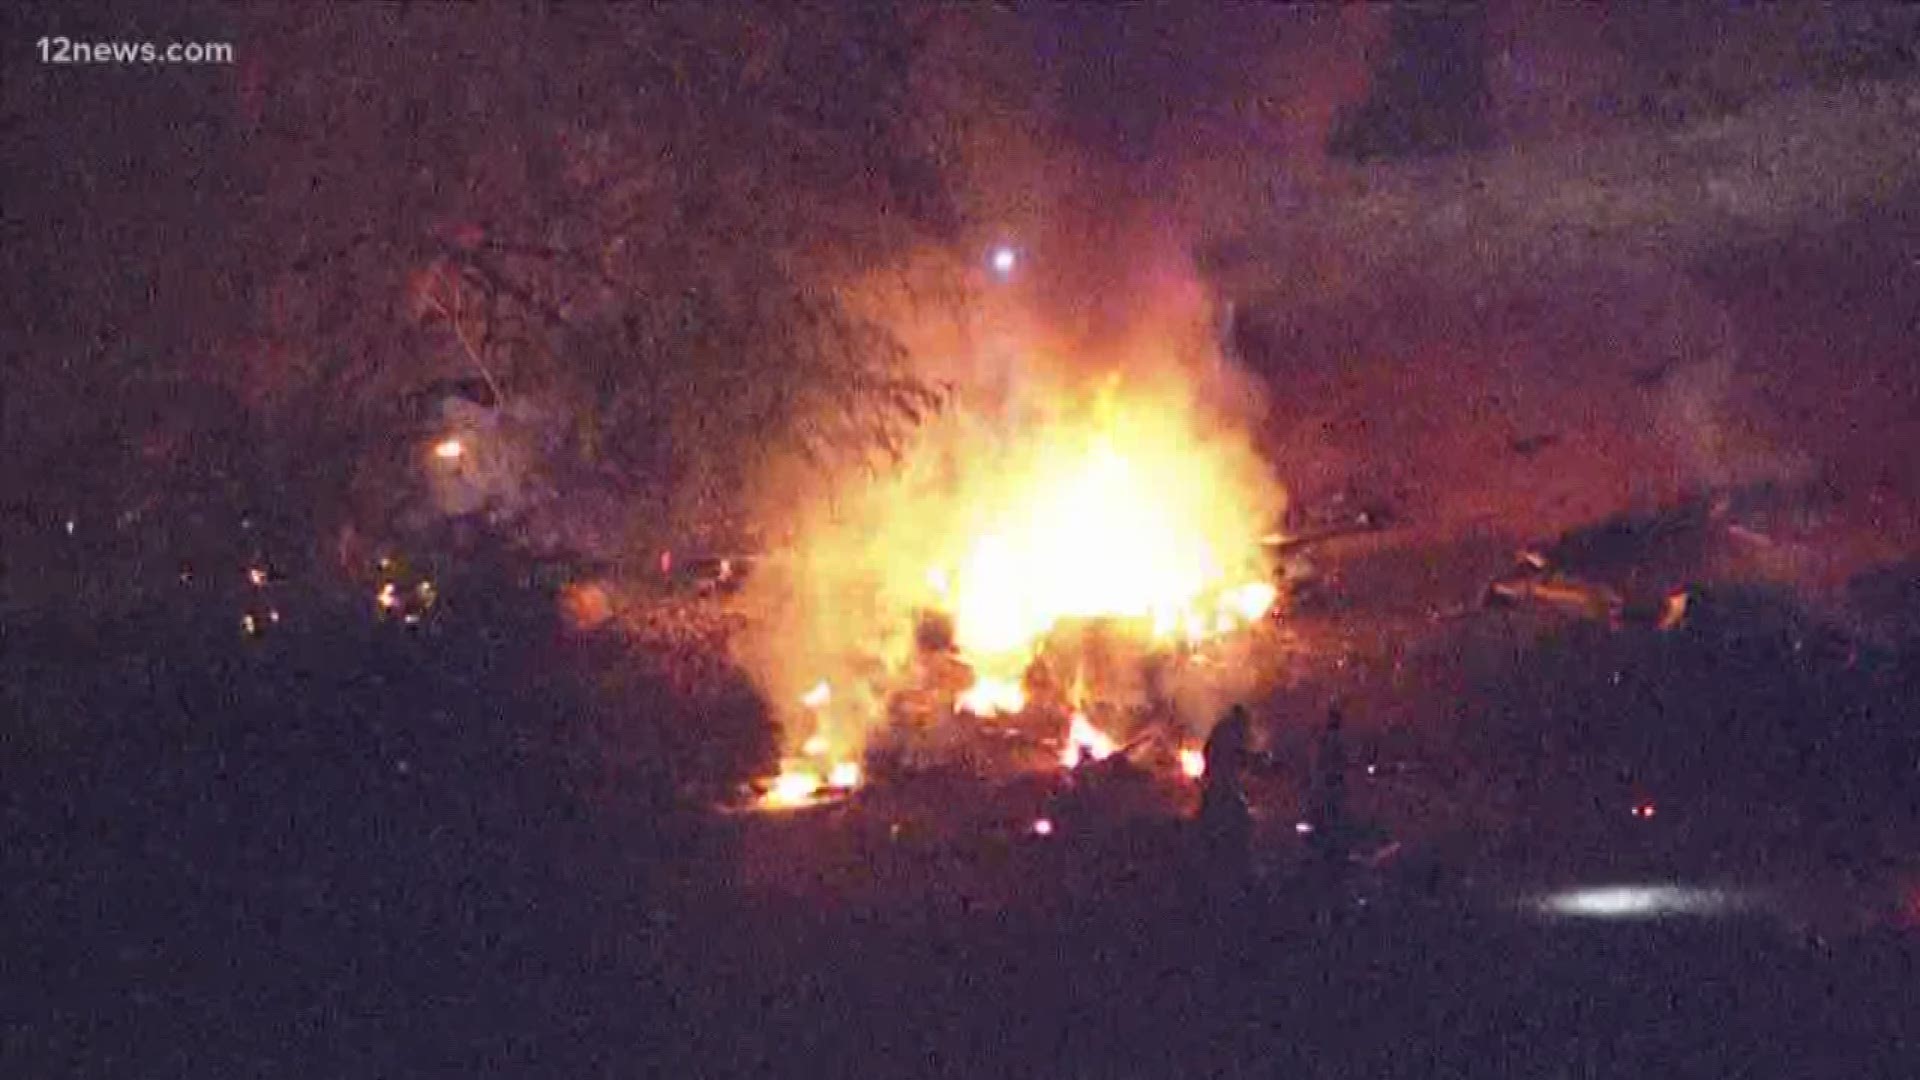 FAA officials said a Piper PA24 crashed onto the golf course at TPC Scottsdale and caught fire after takeoff.